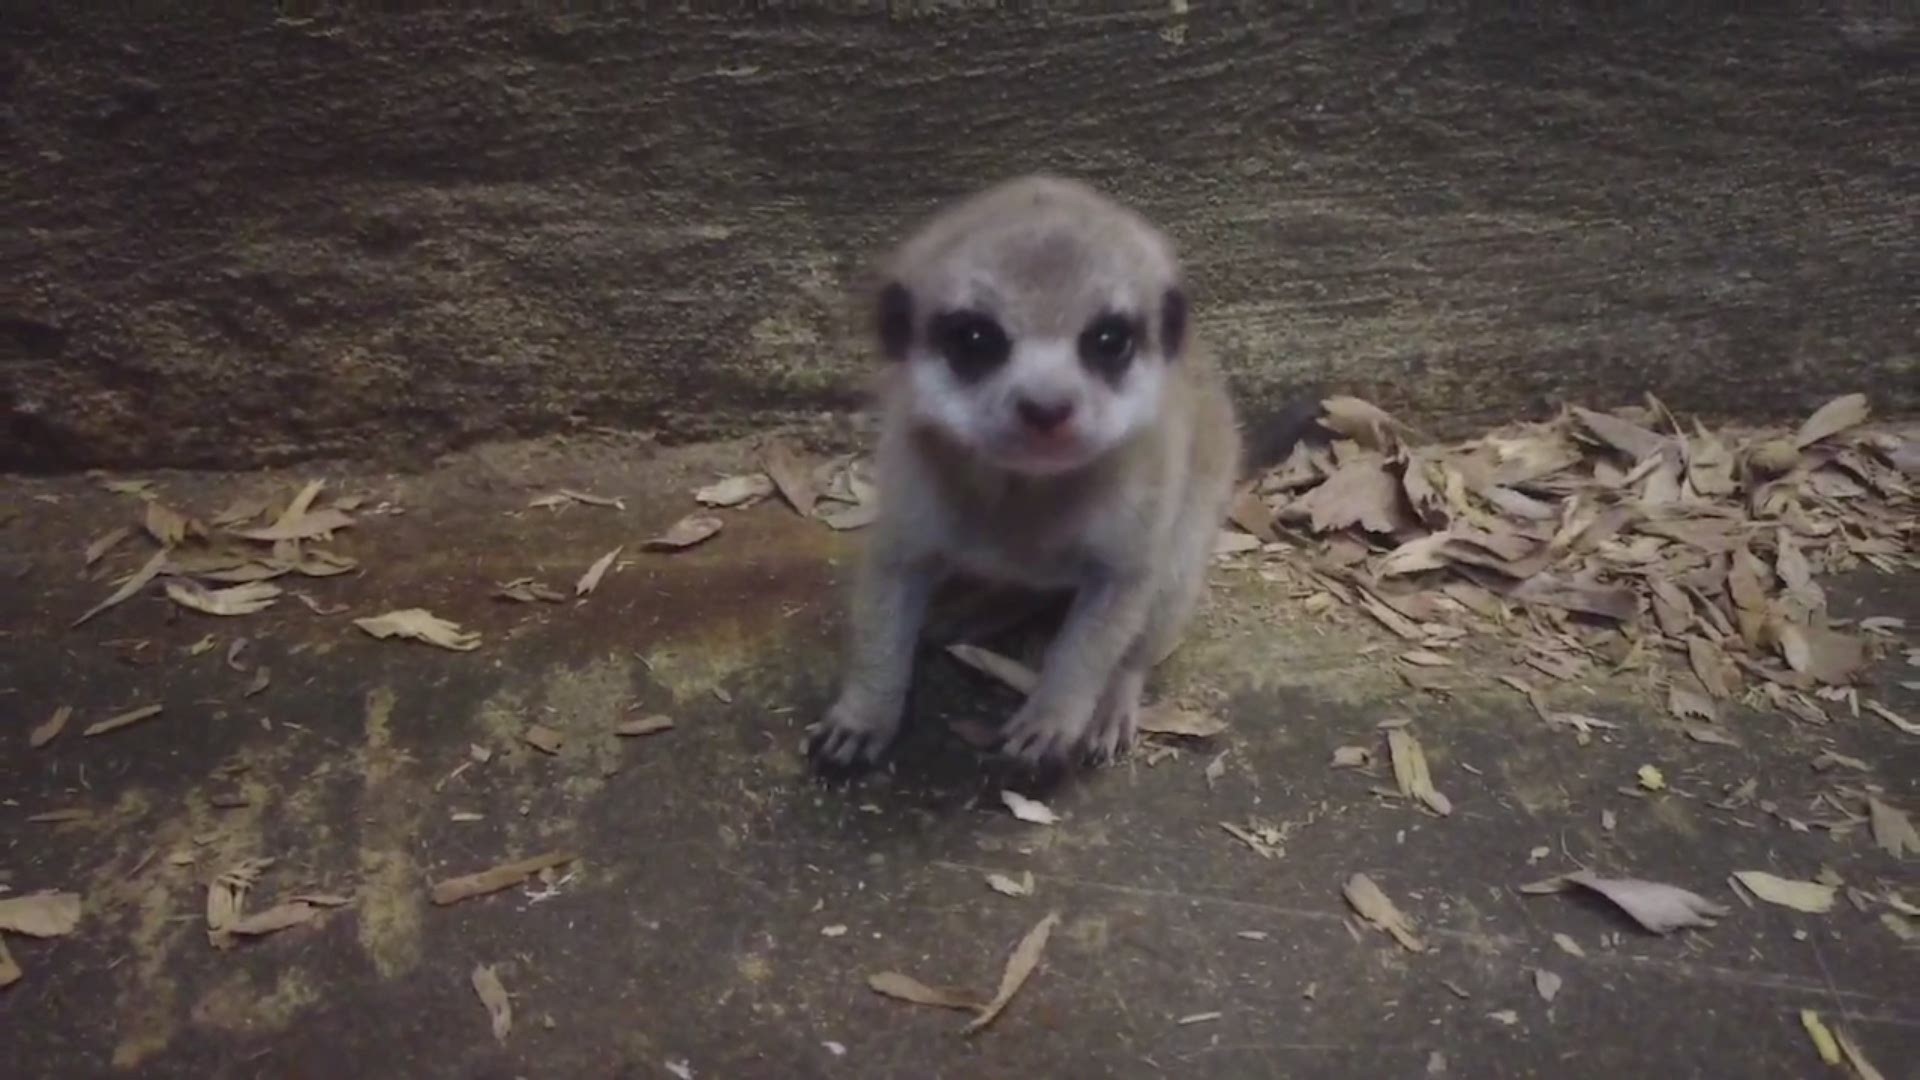 The meerkat pups were born on May 24th to parents Chip and Olivia.